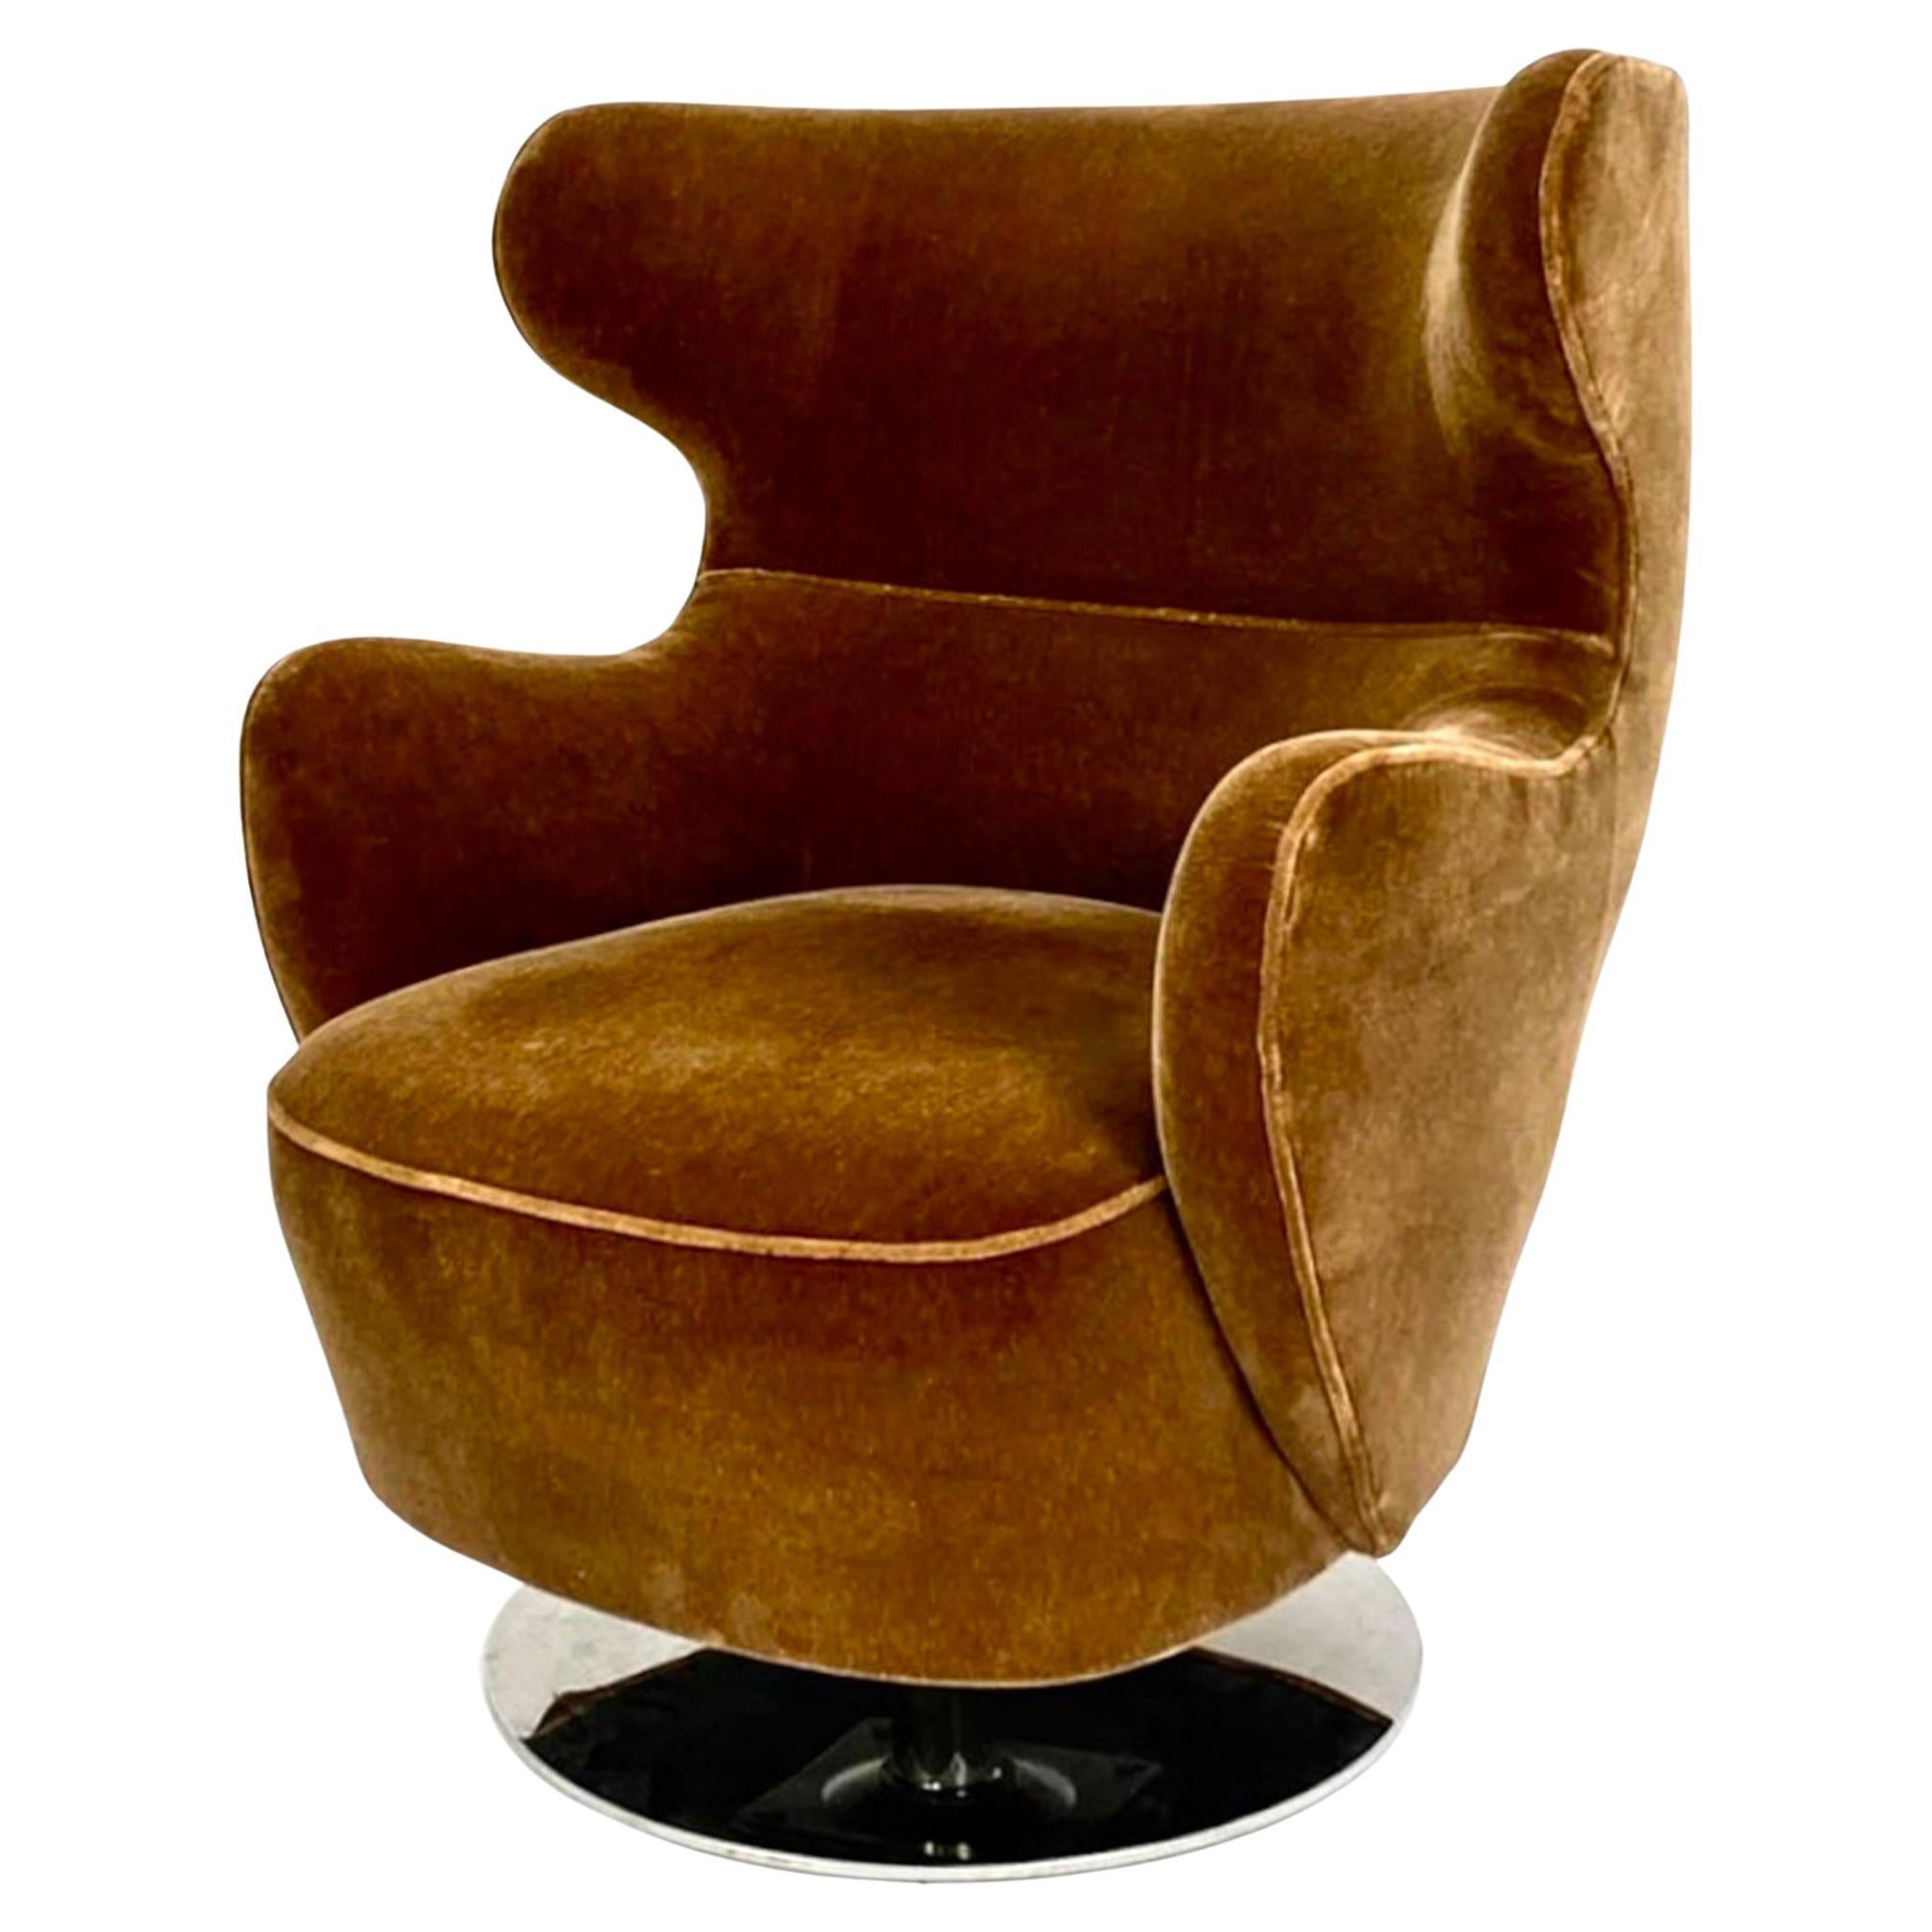 Vladimir Kagan mohair wing chair 100c, polished nickel swivel base, holly hunt. Gorgeous Amber Whiskey Mohair Custom piece. Rare metal swivel base version in polished nickel. 
Designed in 1947 yet remarkably compatible with contemporary living